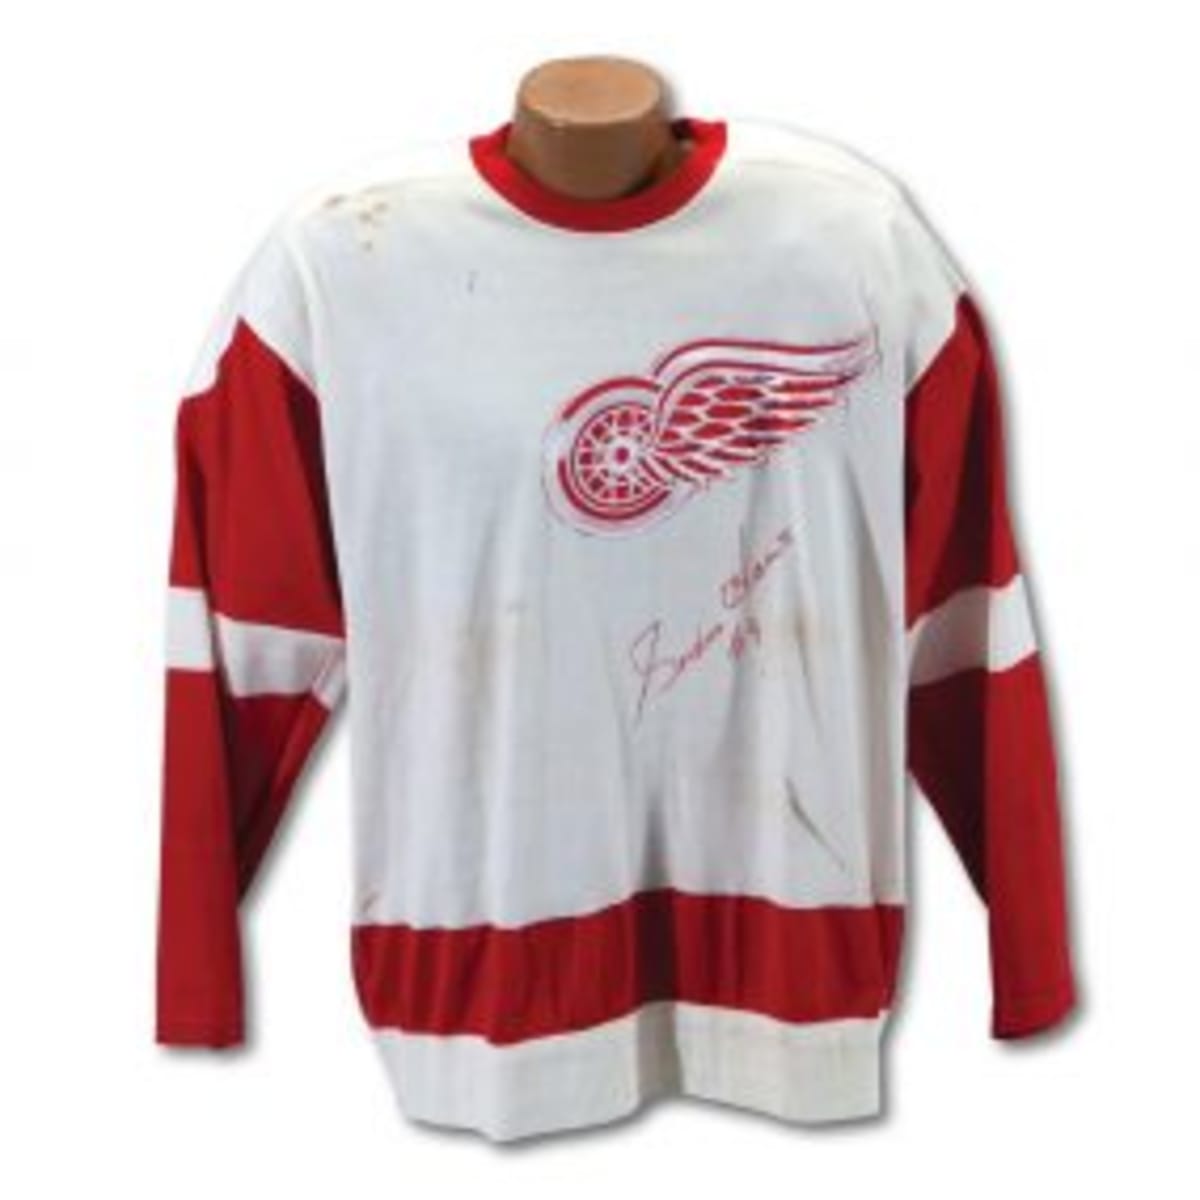 Gordie Howe Red Wings Jersey Approaching $70,000 with Aug. 20